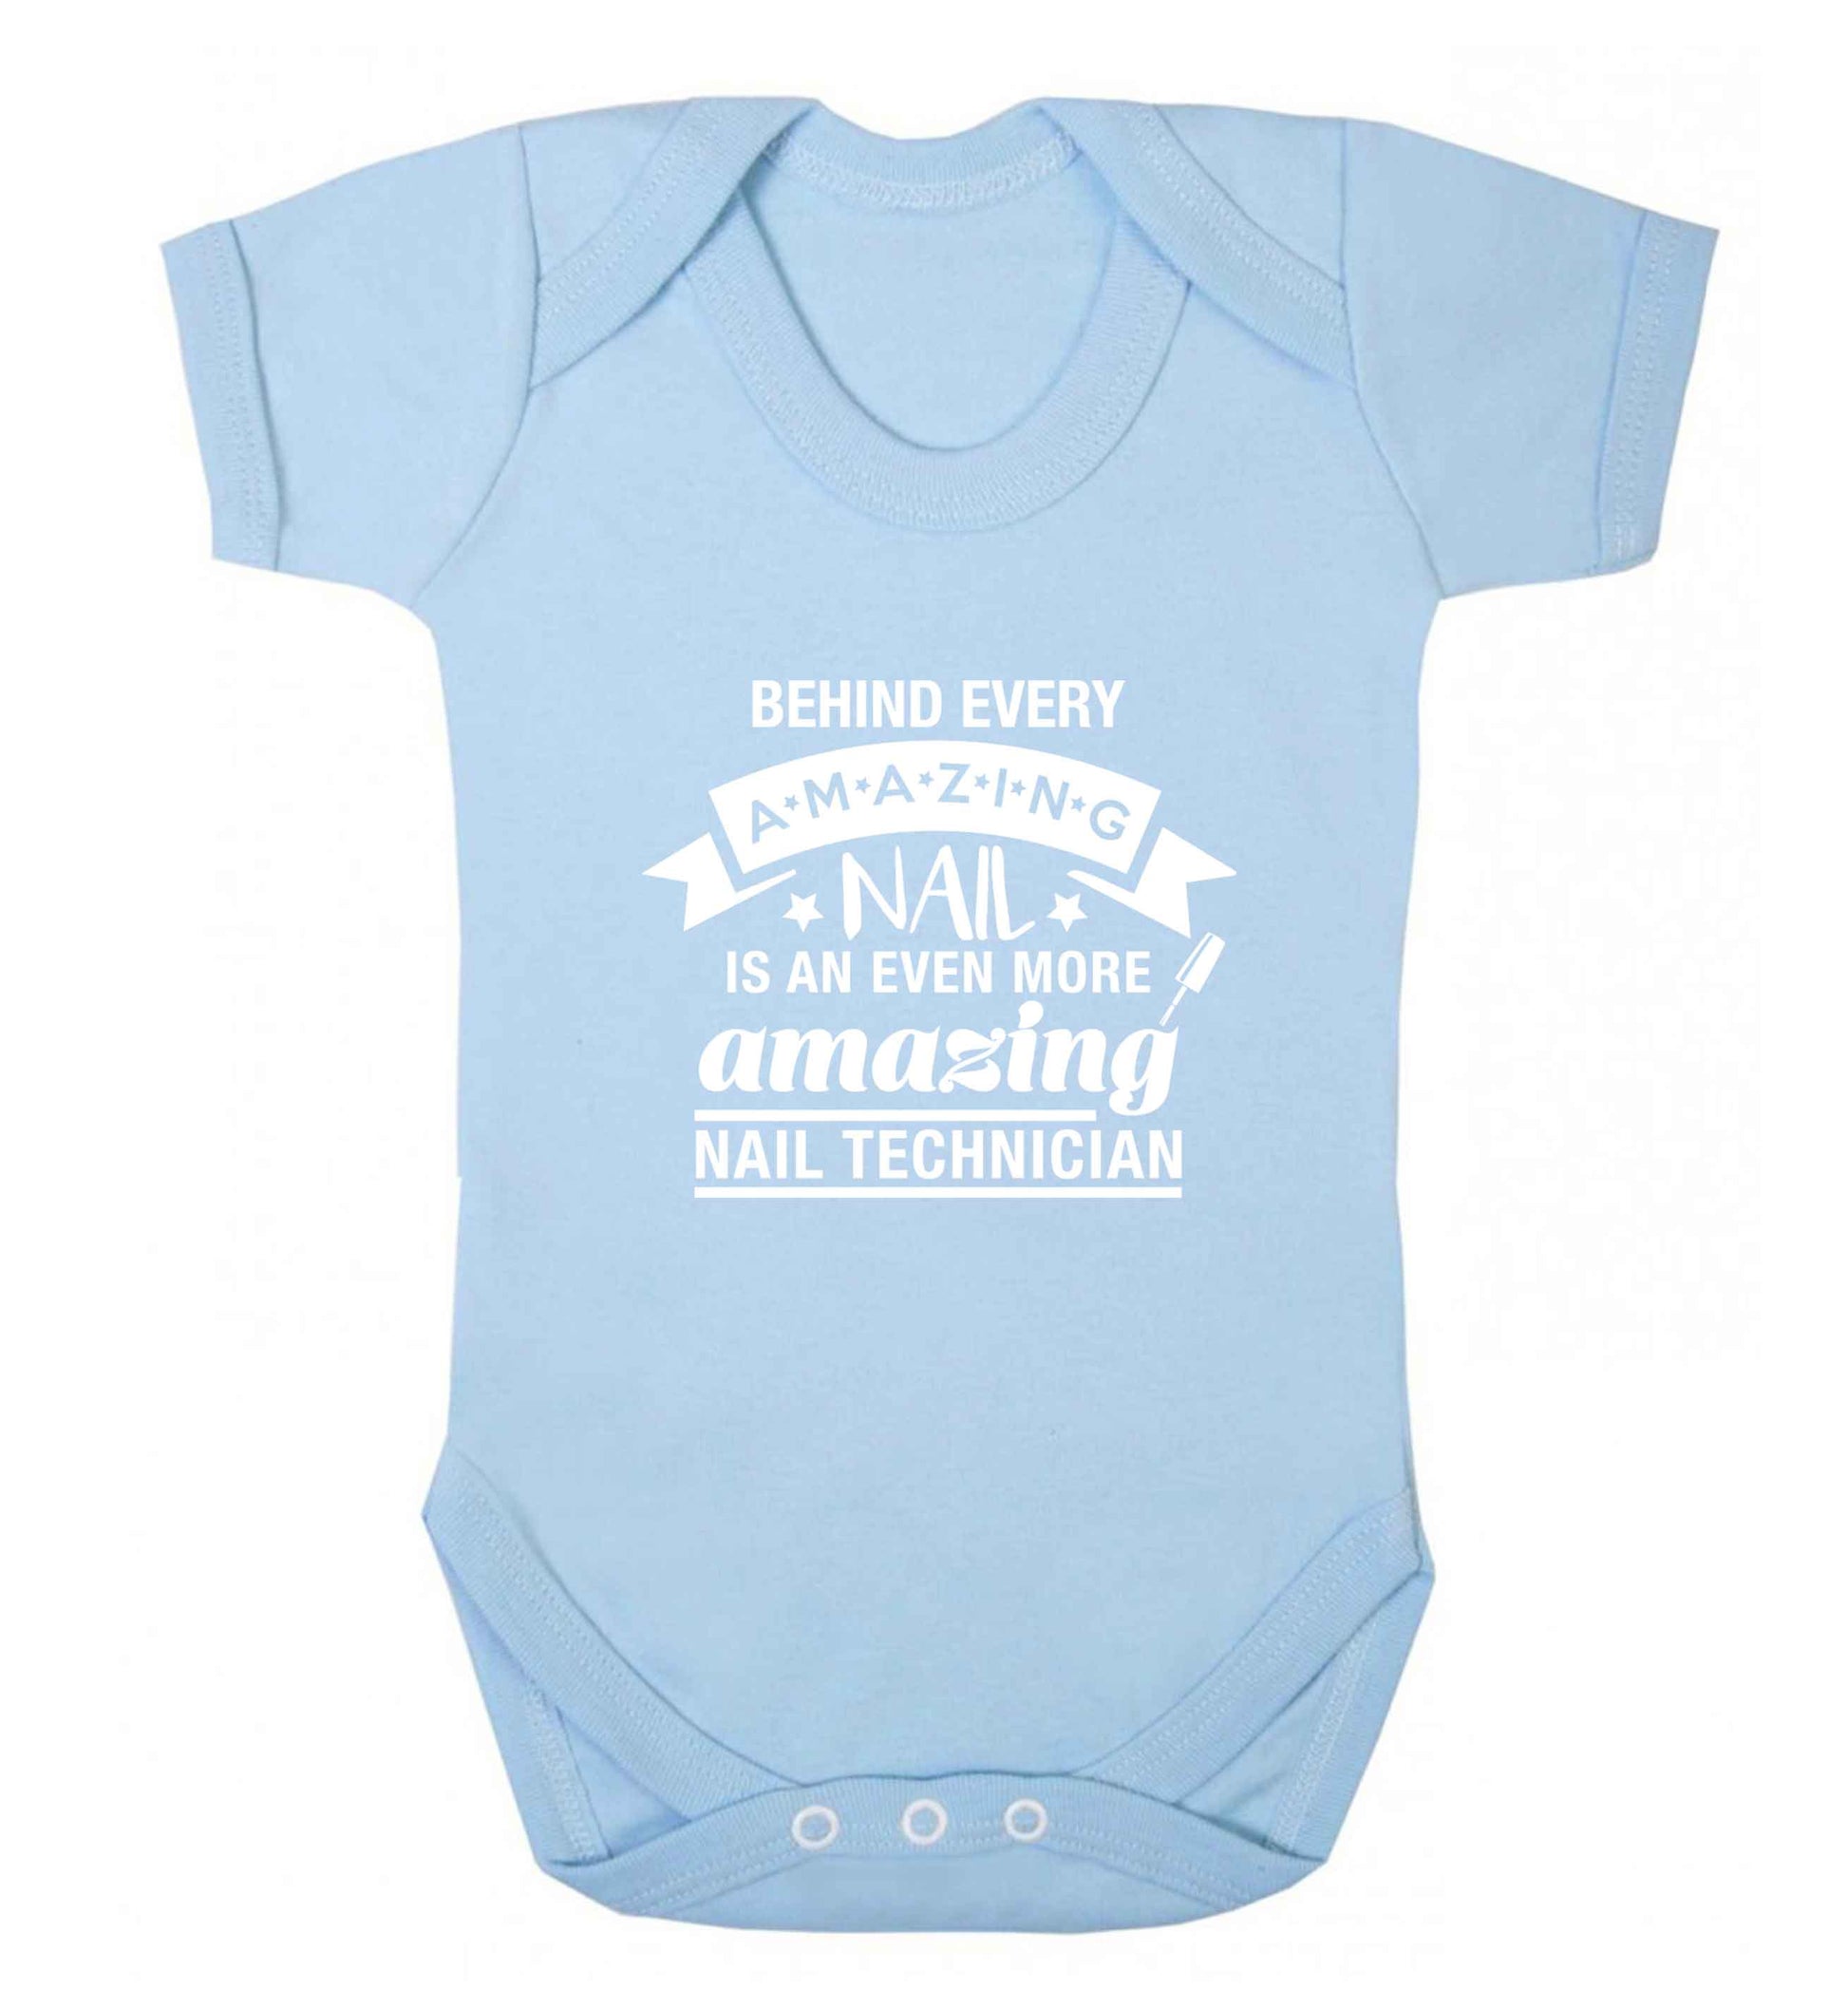 Behind every amazing nail is an even more amazing nail technician baby vest pale blue 18-24 months